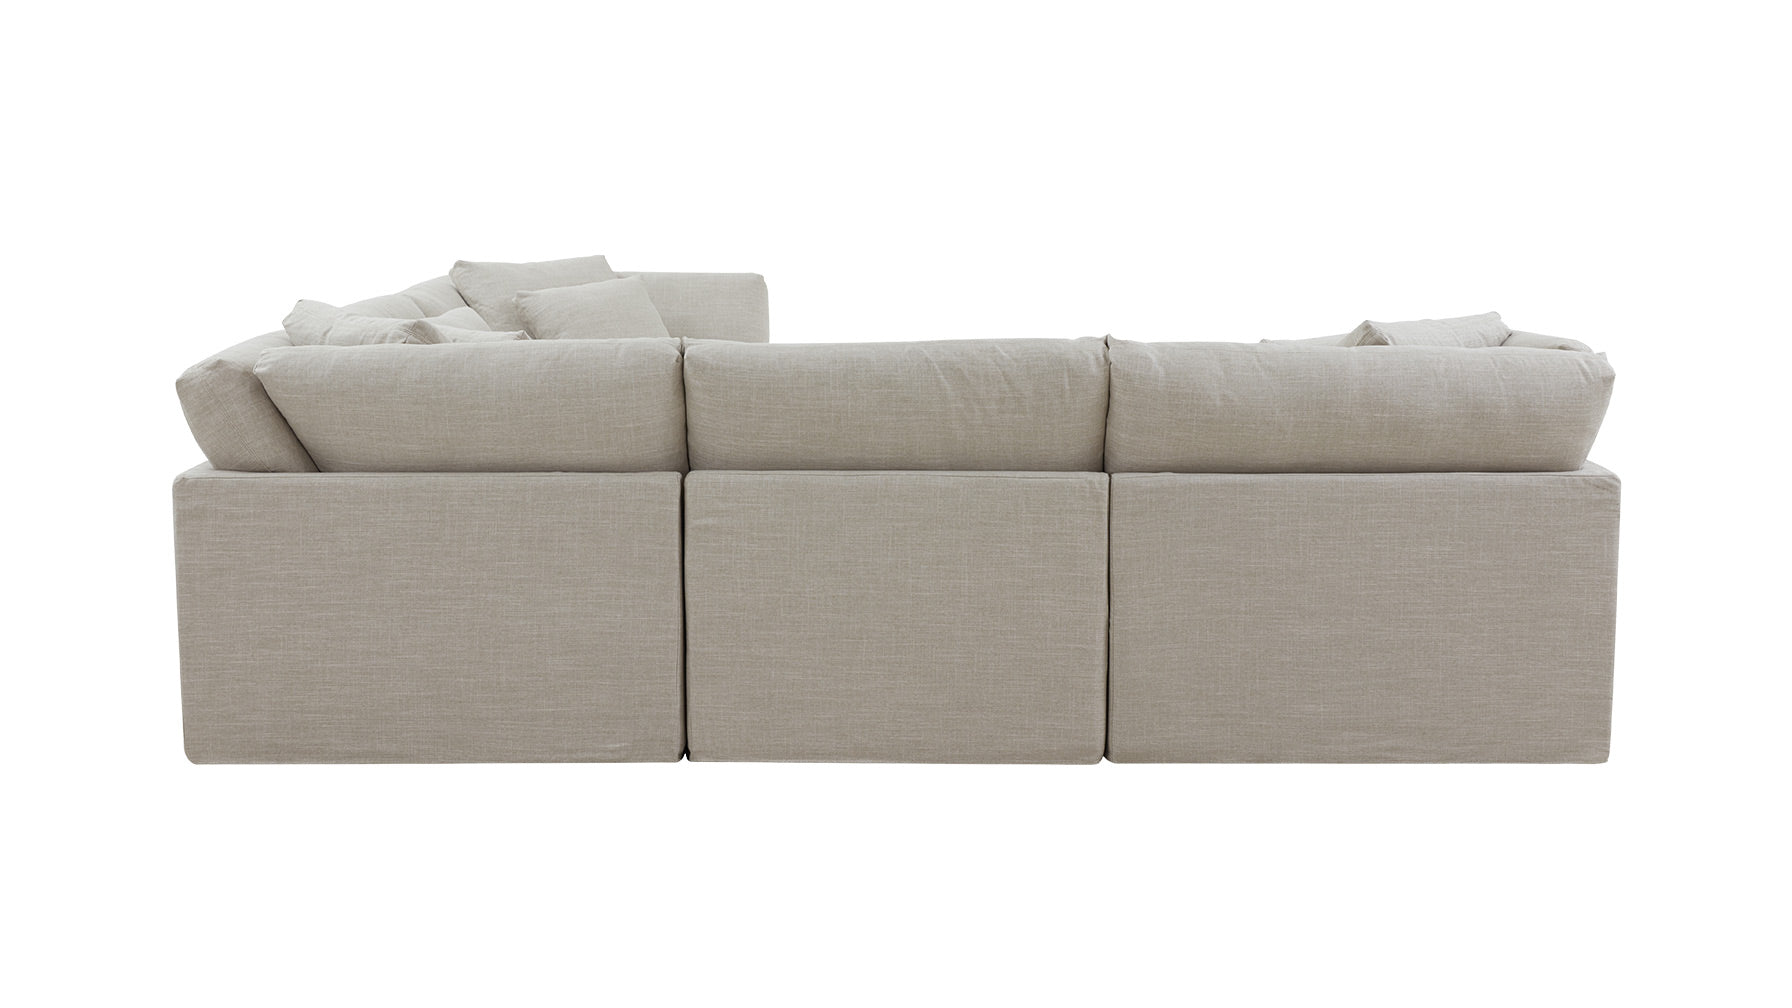 Get Together™ 5-Piece Modular Sectional Closed, Large, Light Pebble - Image 7